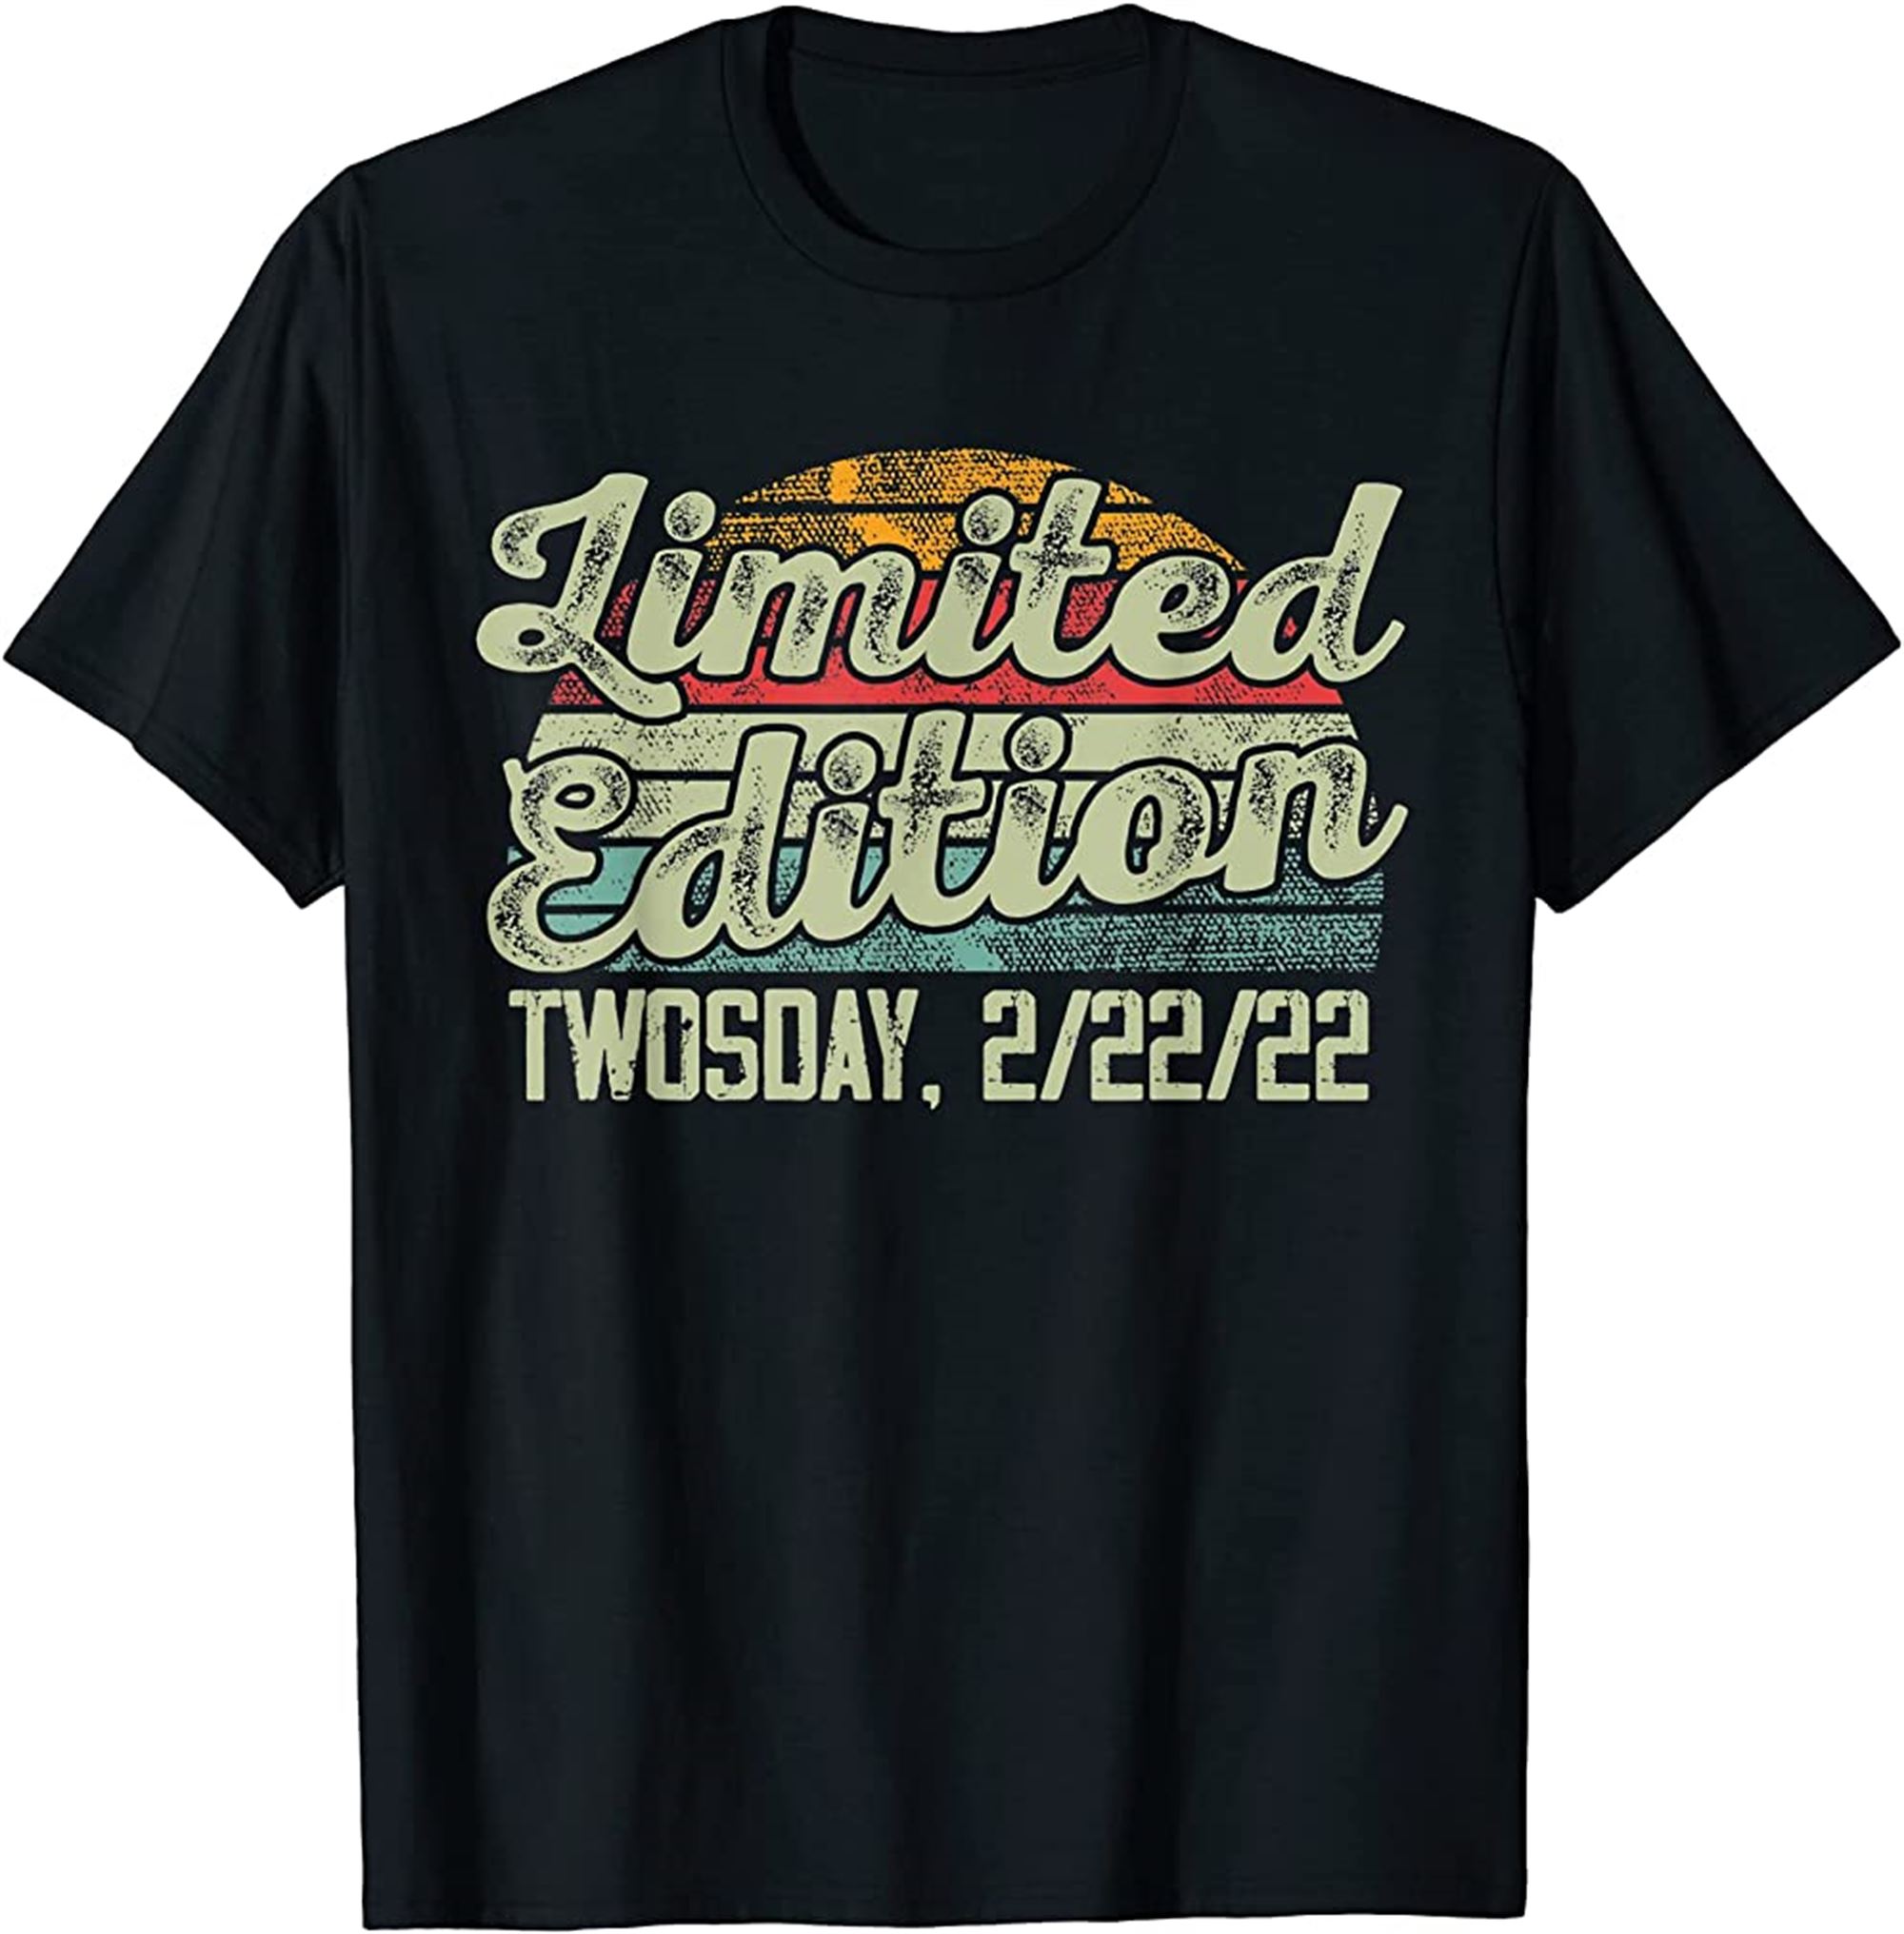 Retro Twosday Tuesday February 22nd 2022 Funny 22222 T-shirt Size Up To 5xl